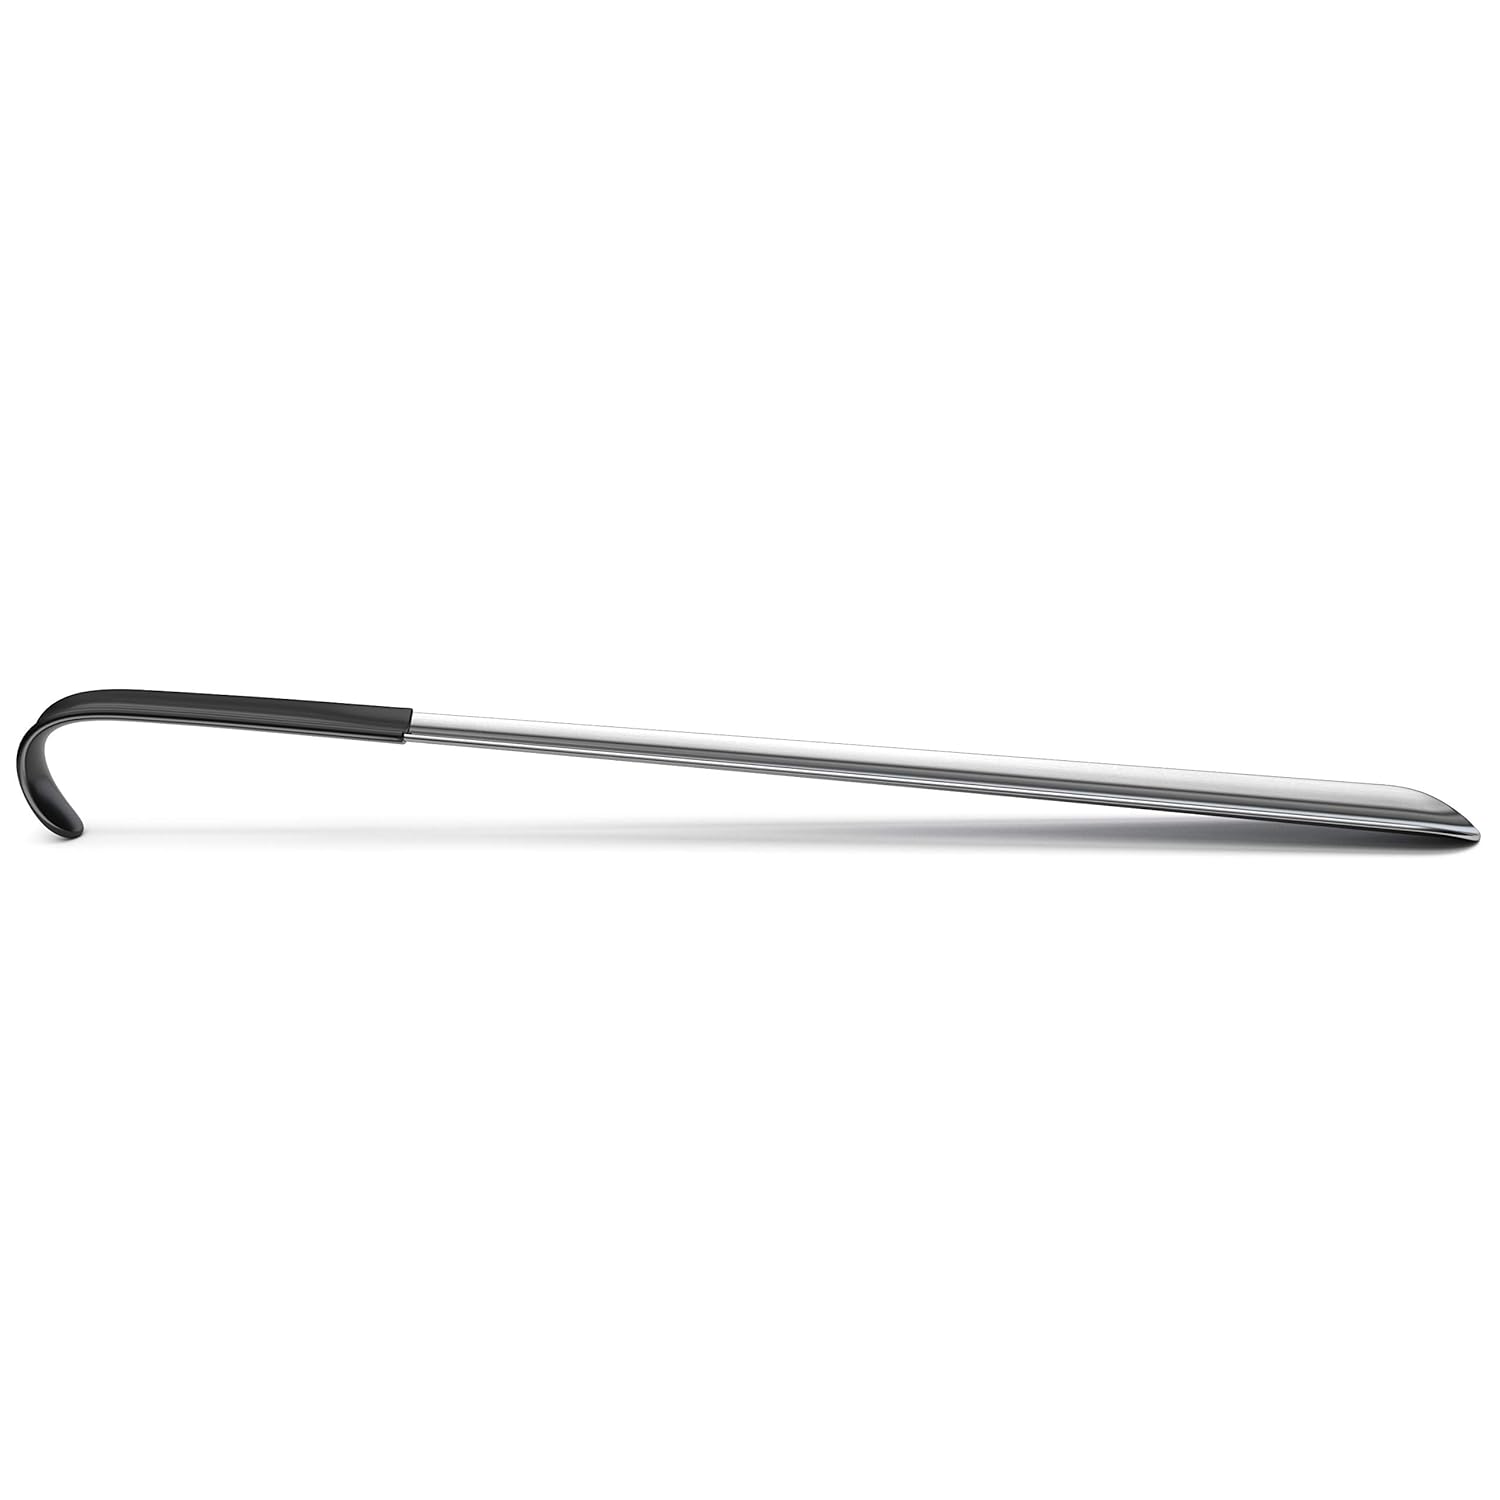 New 2019 Model with 1.8mm Thick Steel HOUNDSBAY 16.5 Long Handled Metal Shoe Horn with Comfort Grip Will Not Bend 